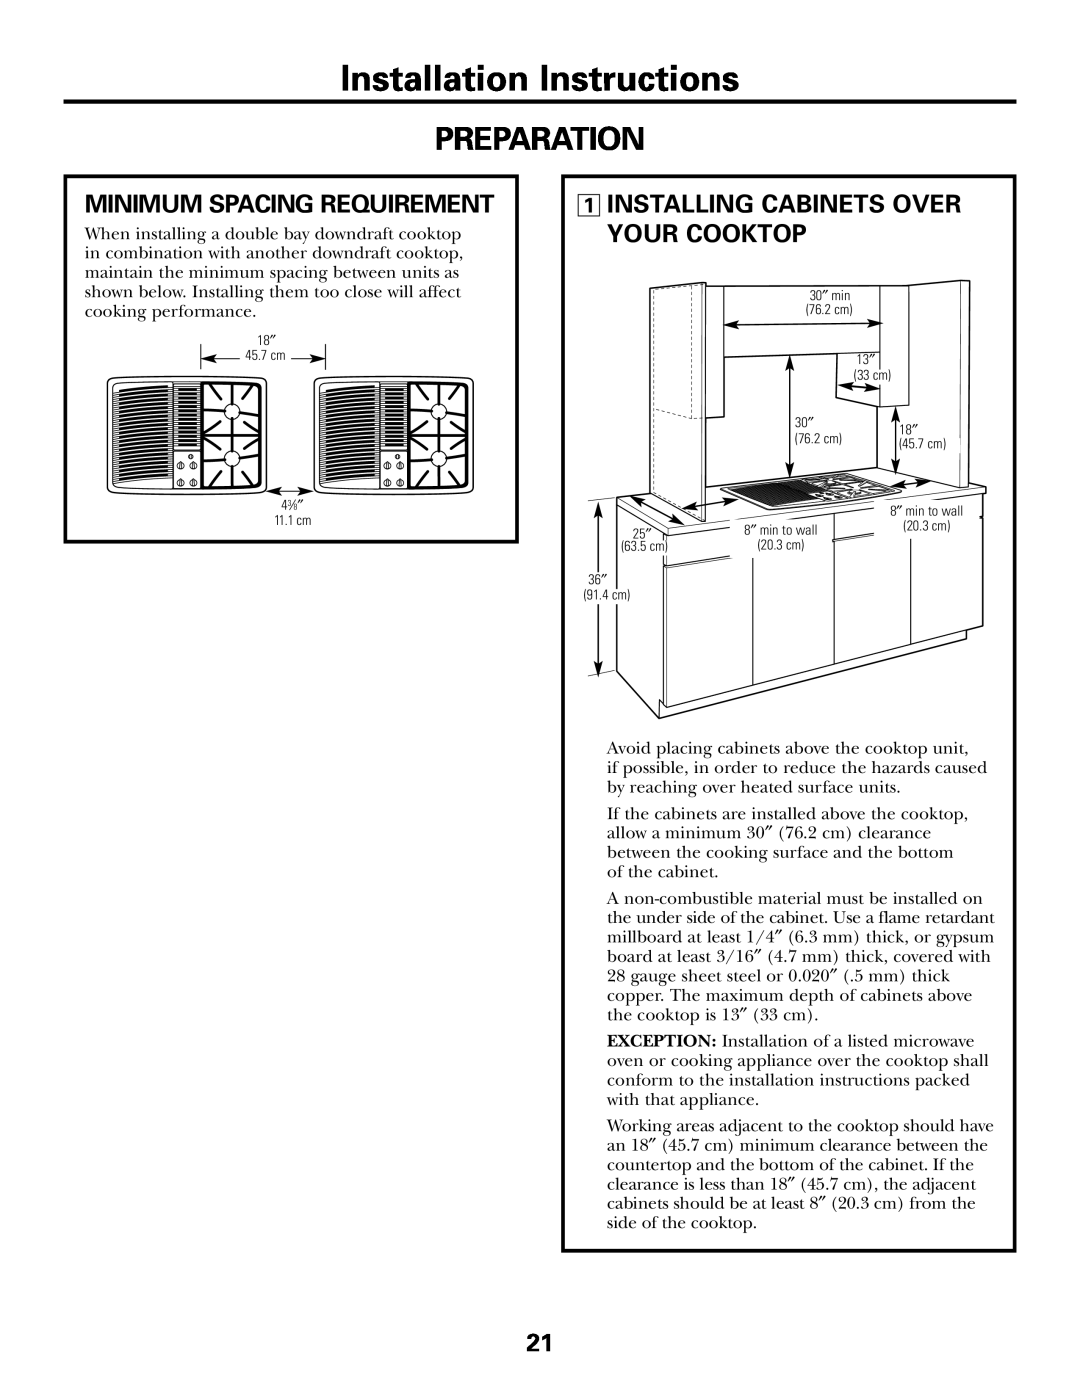 GE JGP985 Installation Instructions, Preparation, Minimum Spacing Requirement, 1INSTALLING CABINETS OVER YOUR COOKTOP 